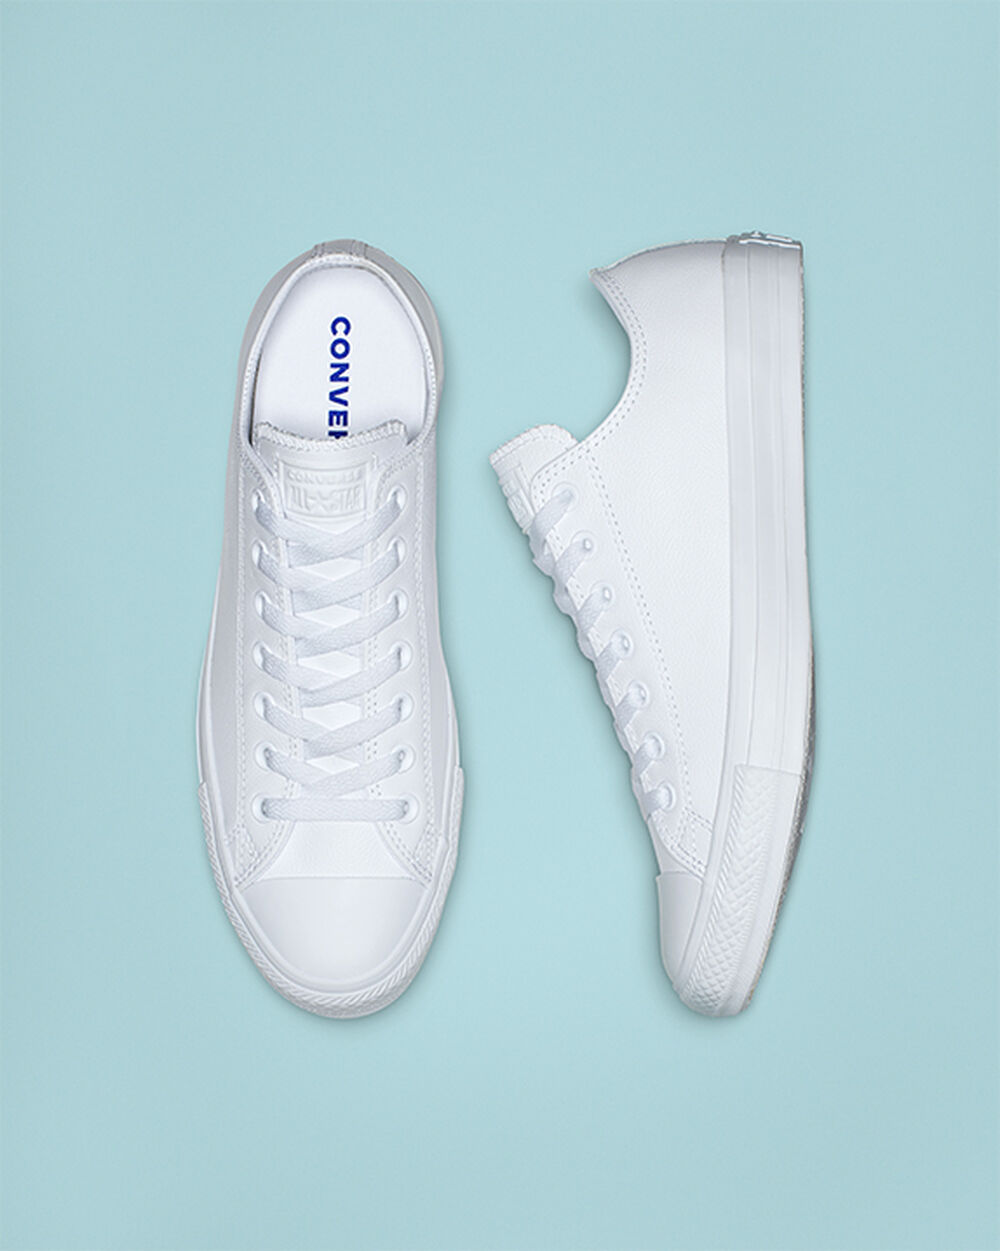 Tenis Converse Chuck Taylor All Star Mujer Blancos | Mexico-04616